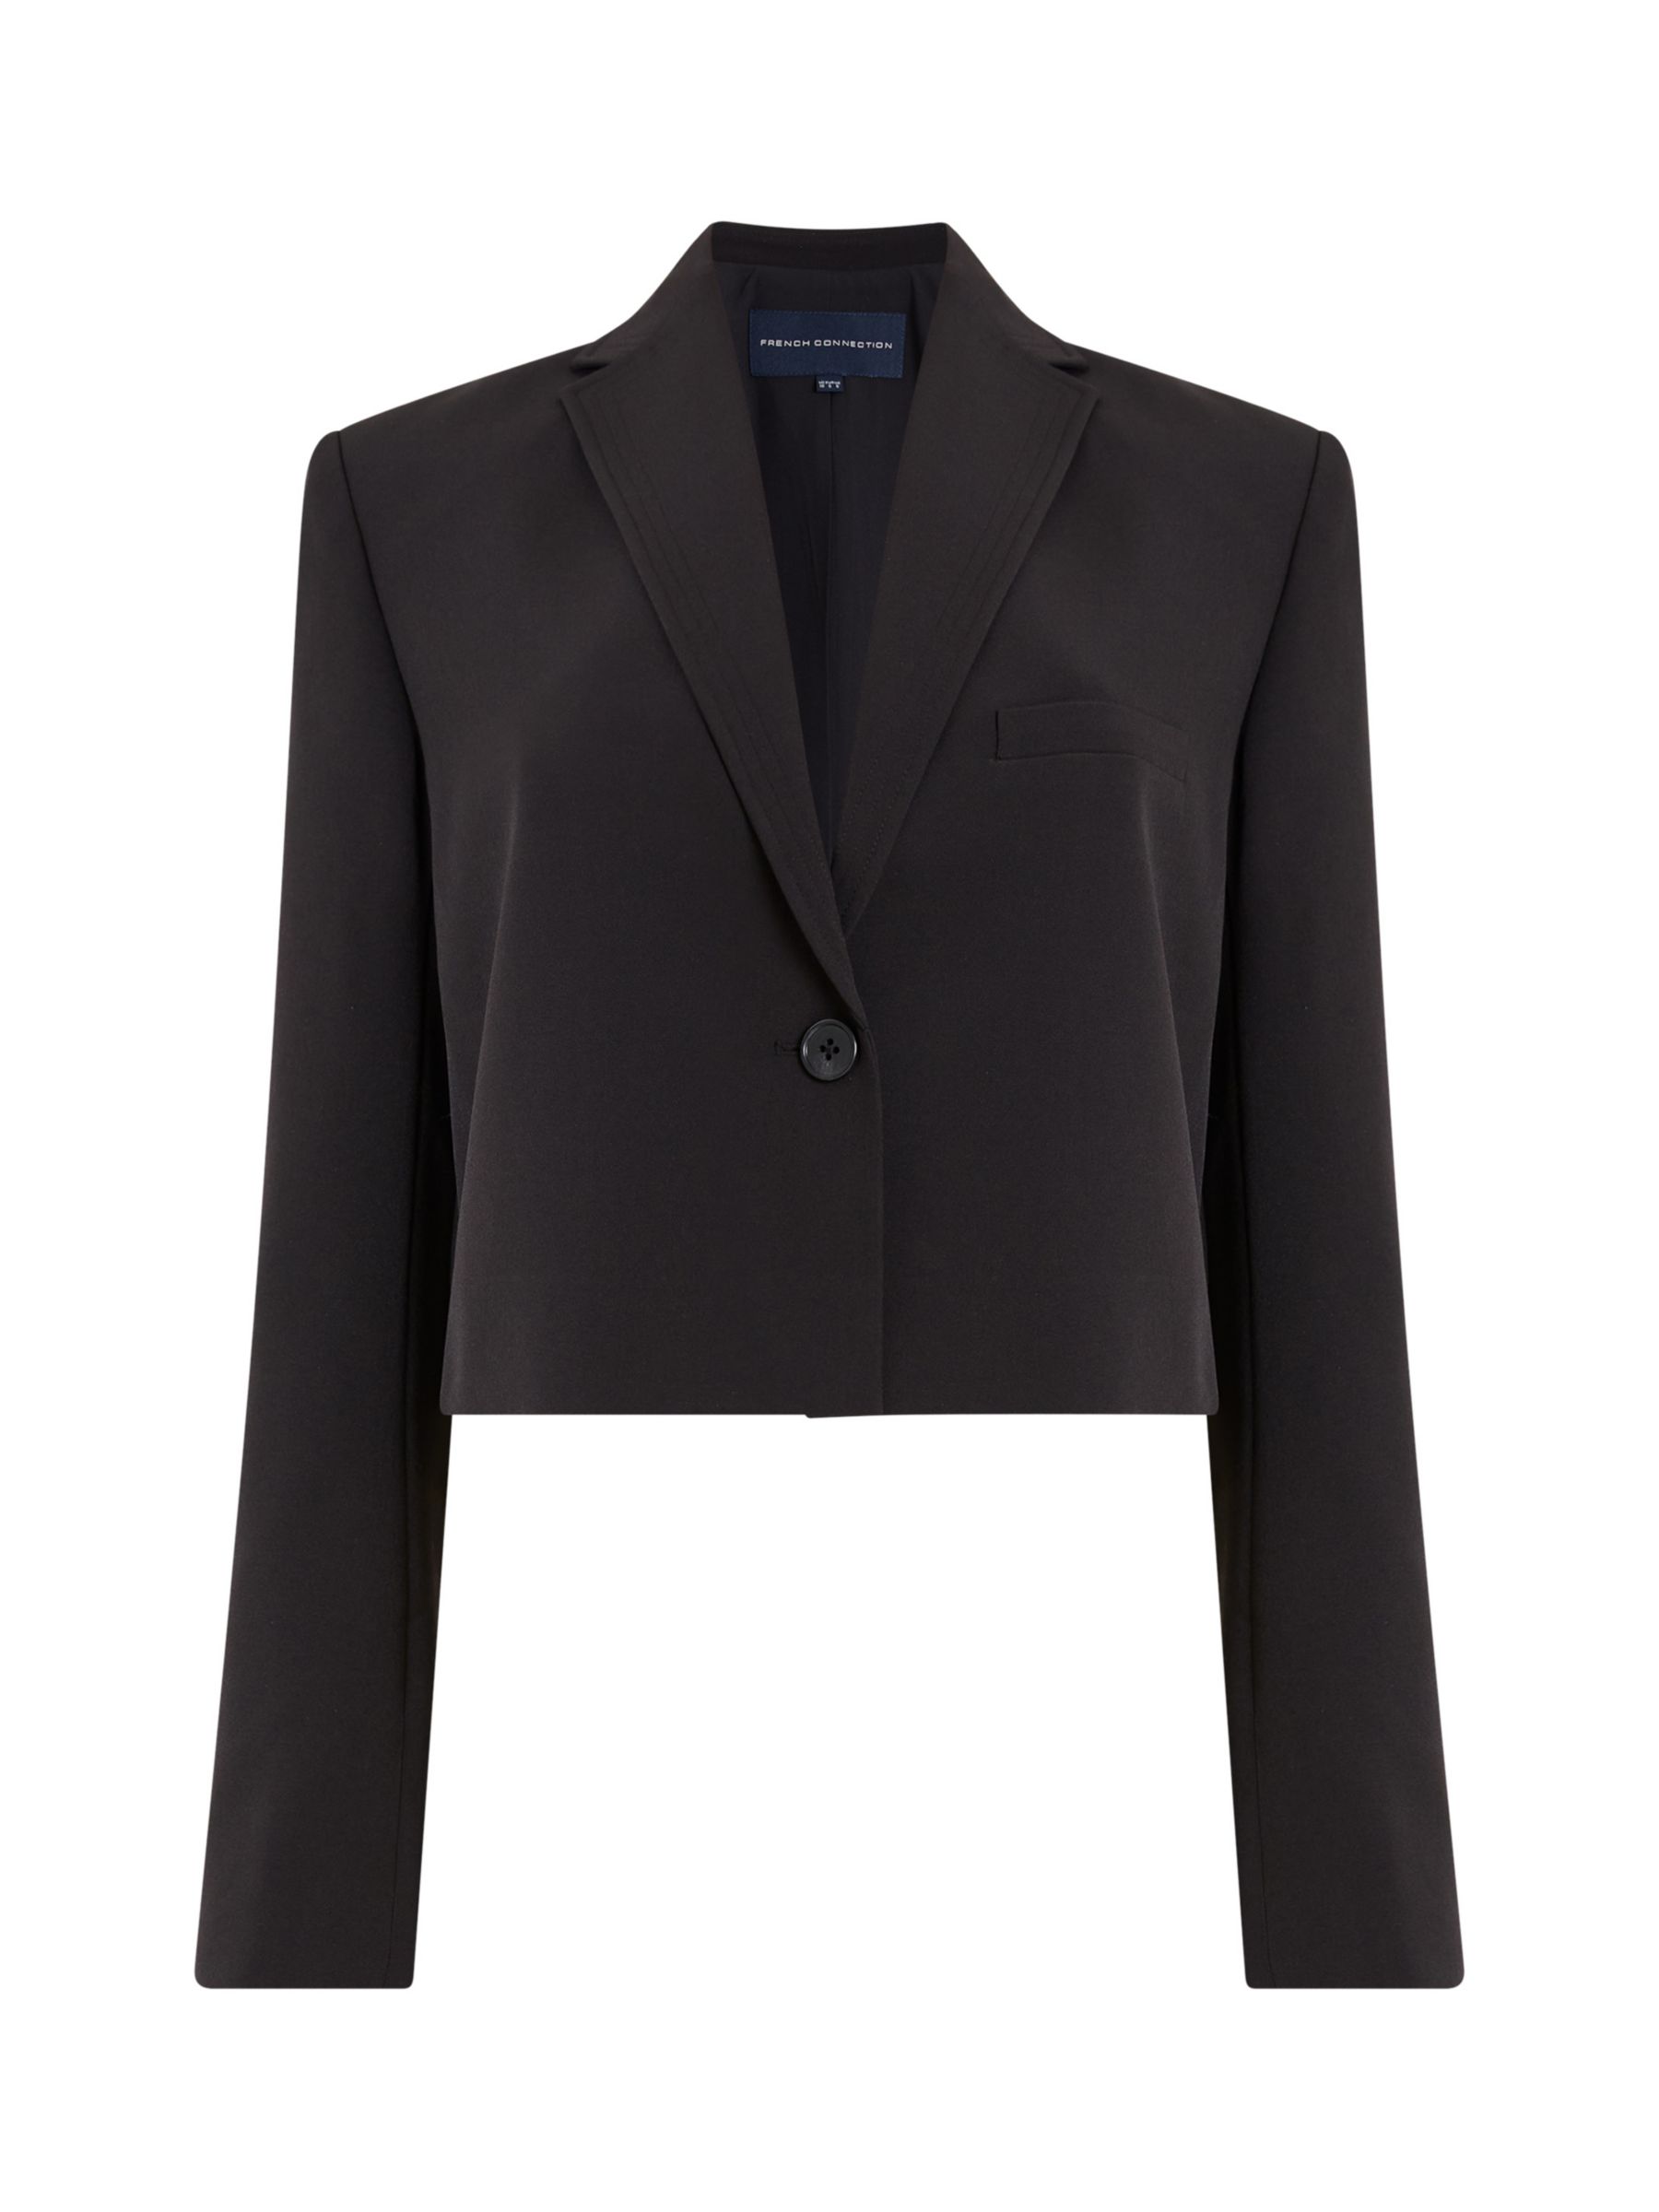 French Connection Echo Cropped Crepe Blazer, Blackout, S